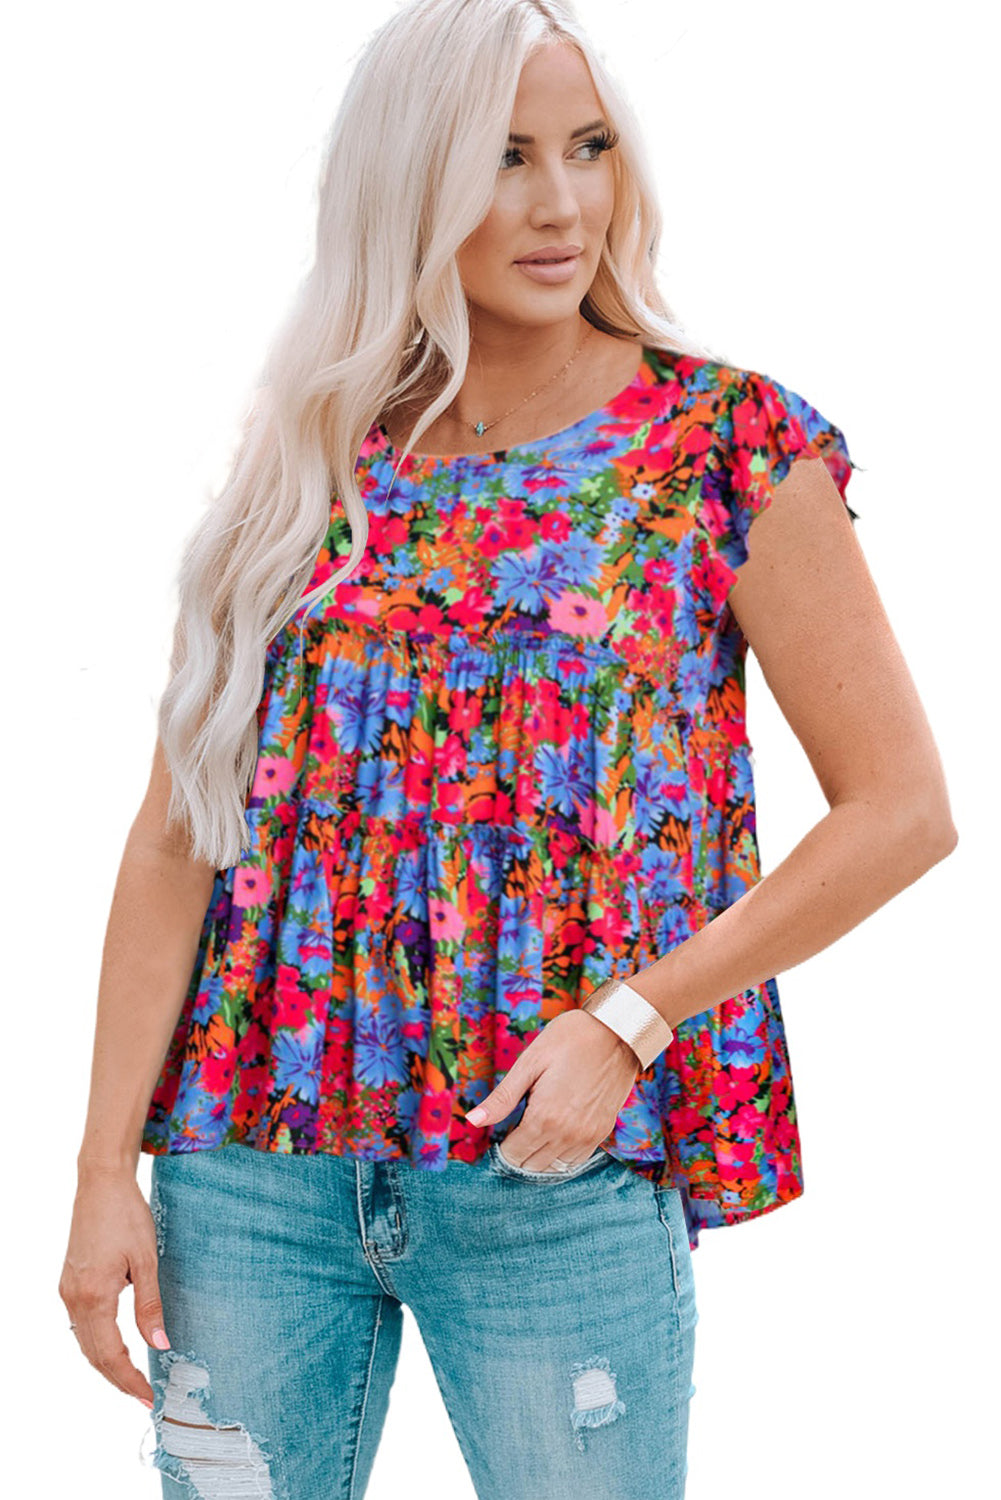 Floral Round Neck Frill Trim Blouse